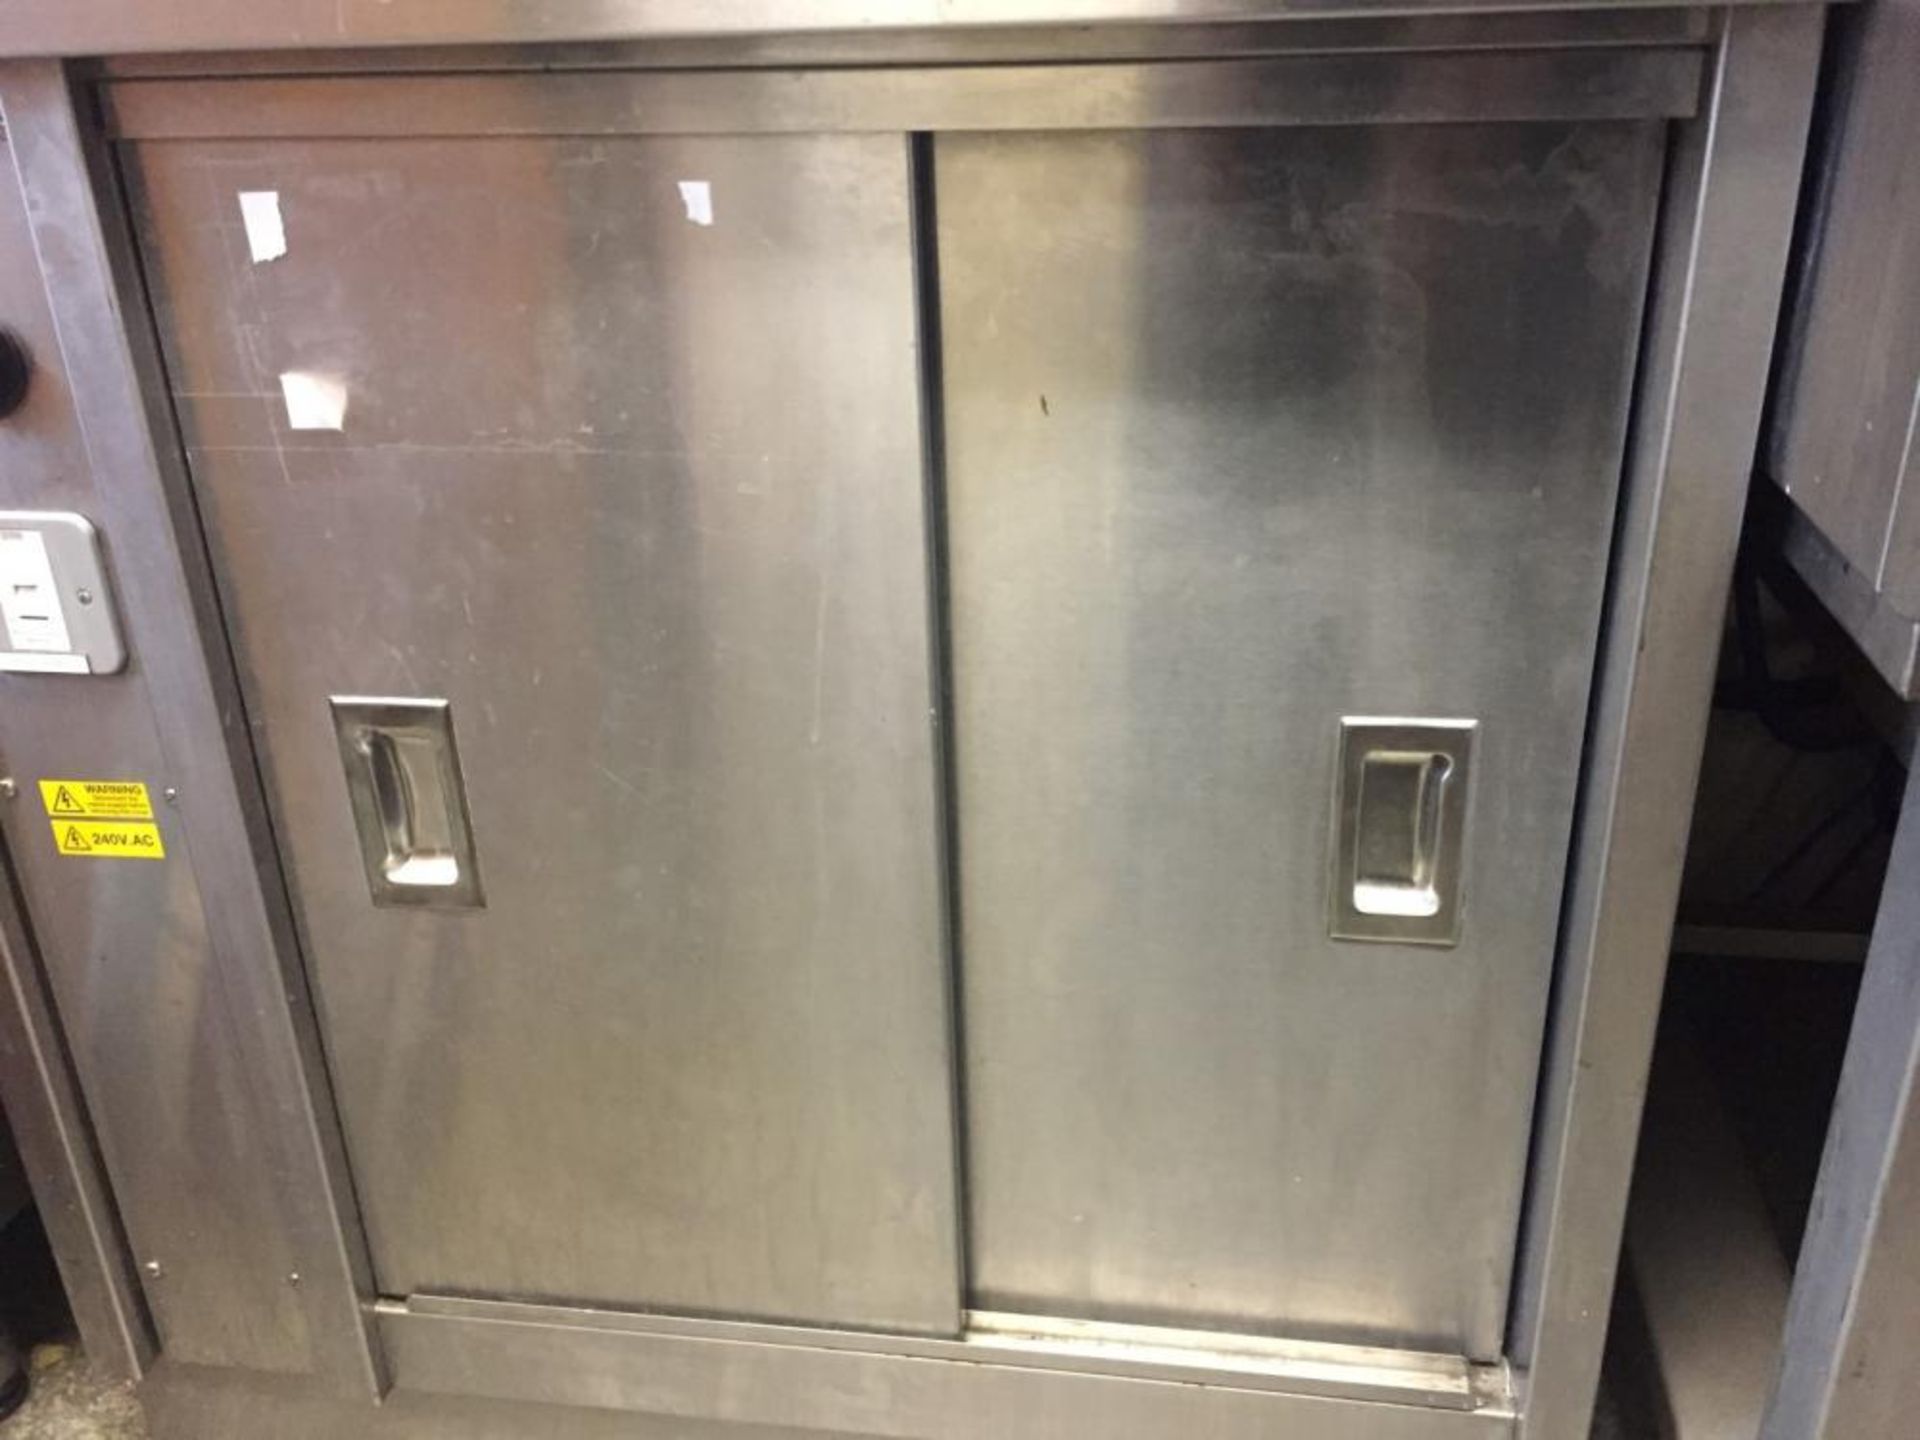 1 x Stainless Steel Commercial Hot Cupboard - Dimensions: W90 x D55 x H90cm - CL191 - Location: - Image 4 of 5